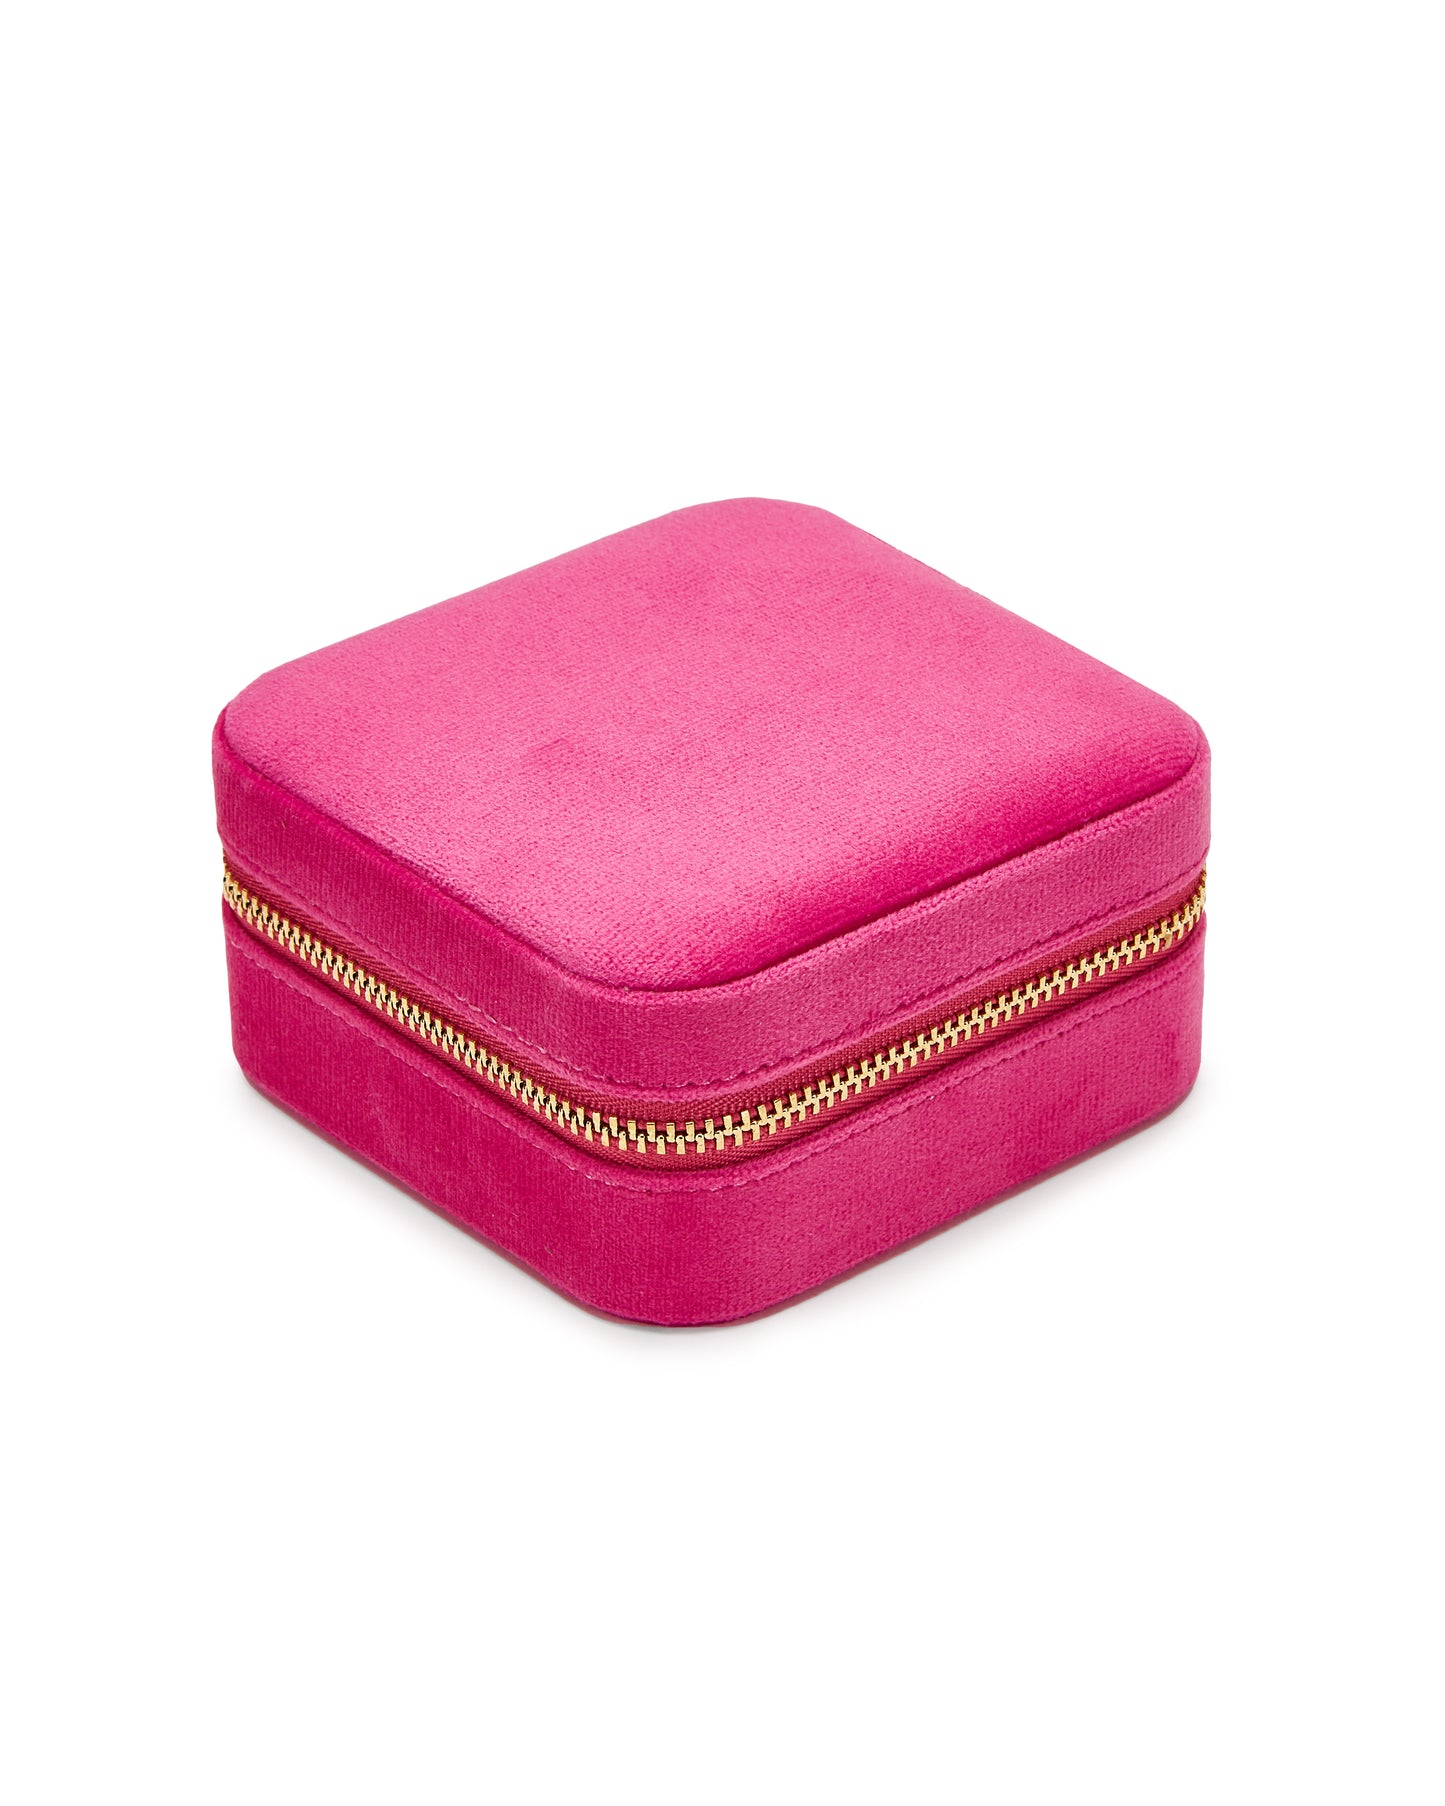 VELVET JEWELRY BOX col. pink orchid, directly orderable - 5 pieces